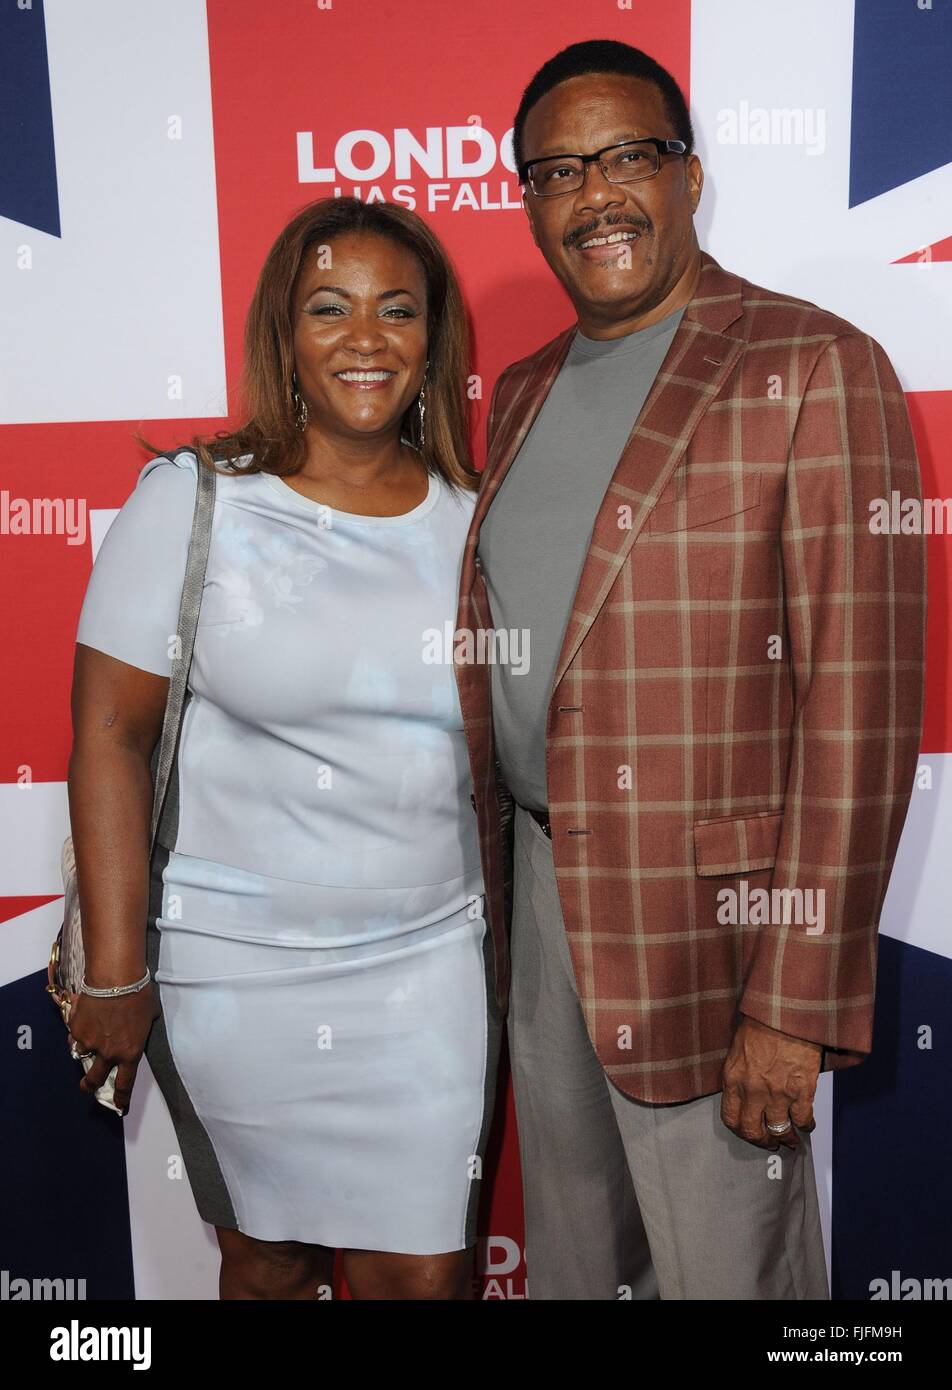 Judge Mathis, Wife at arrivals for LONDON HAS FALLEN Premiere, ArcLight ...